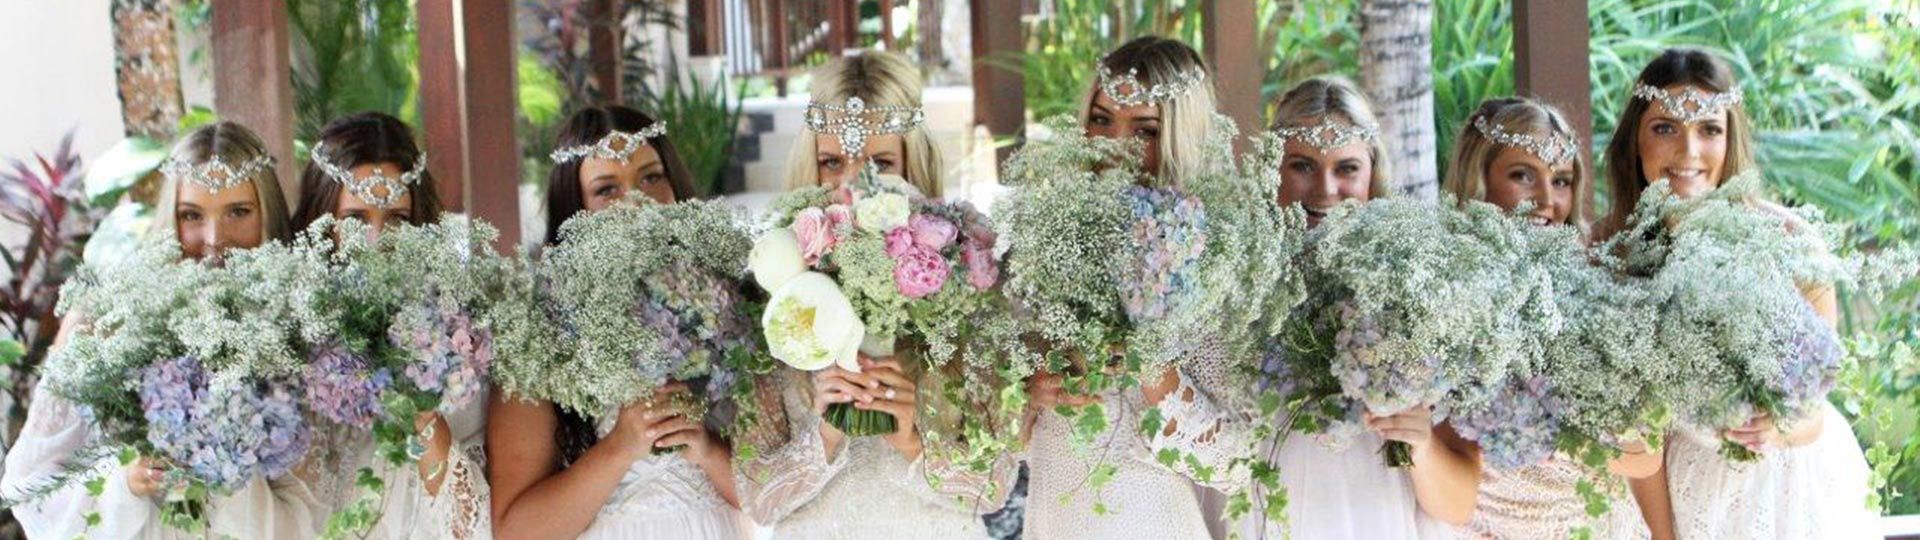 Weddings Without Waste: Creating an Eco-Conscious Bali Wedding with Tirtha Bridal